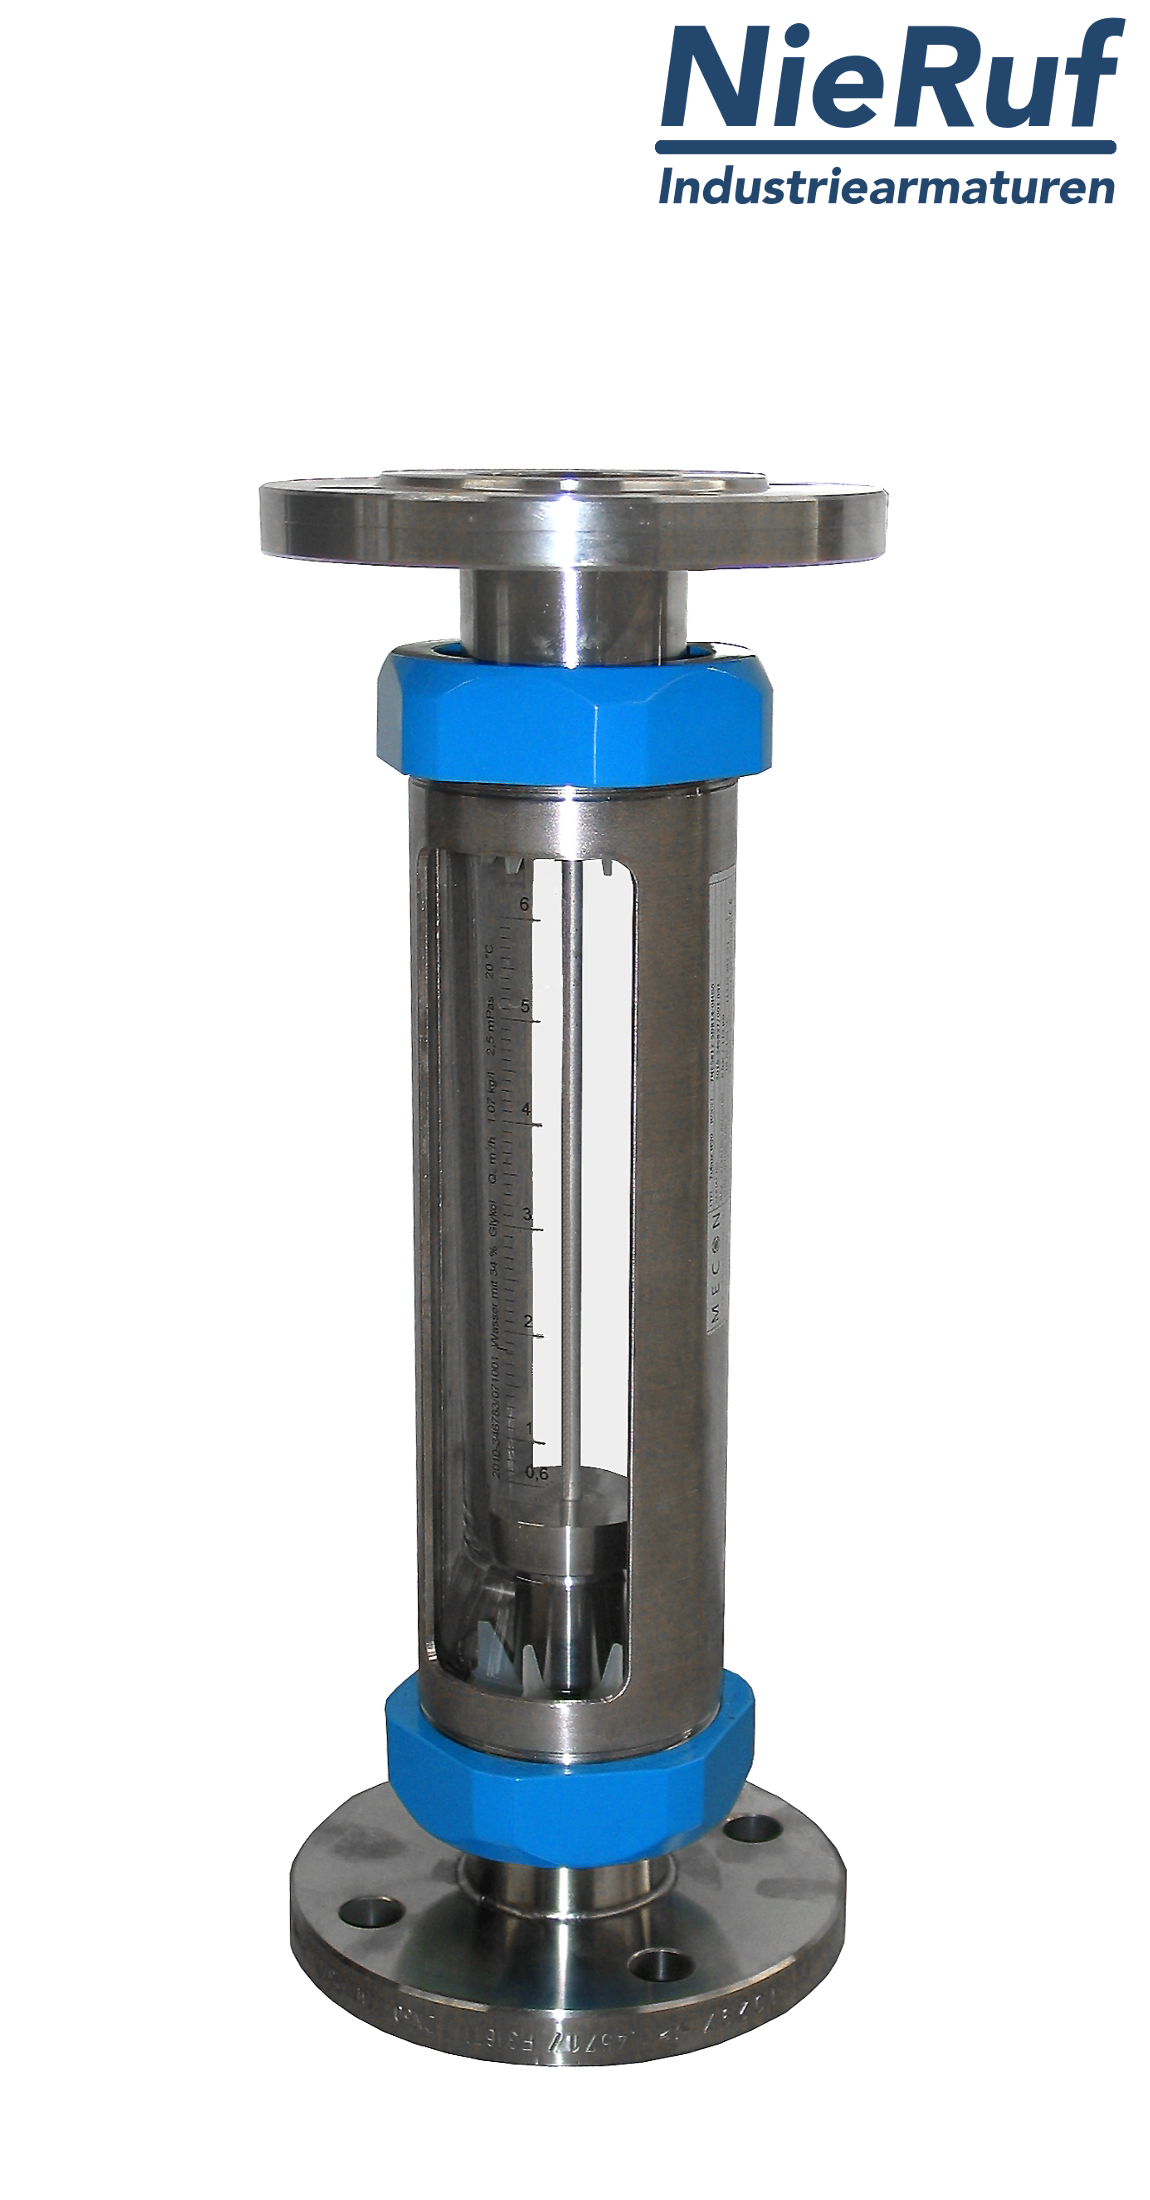 Variable area flowmeter stainless steel + borosilicate flange DN15 3.0 - 30.0 l/h water FKM